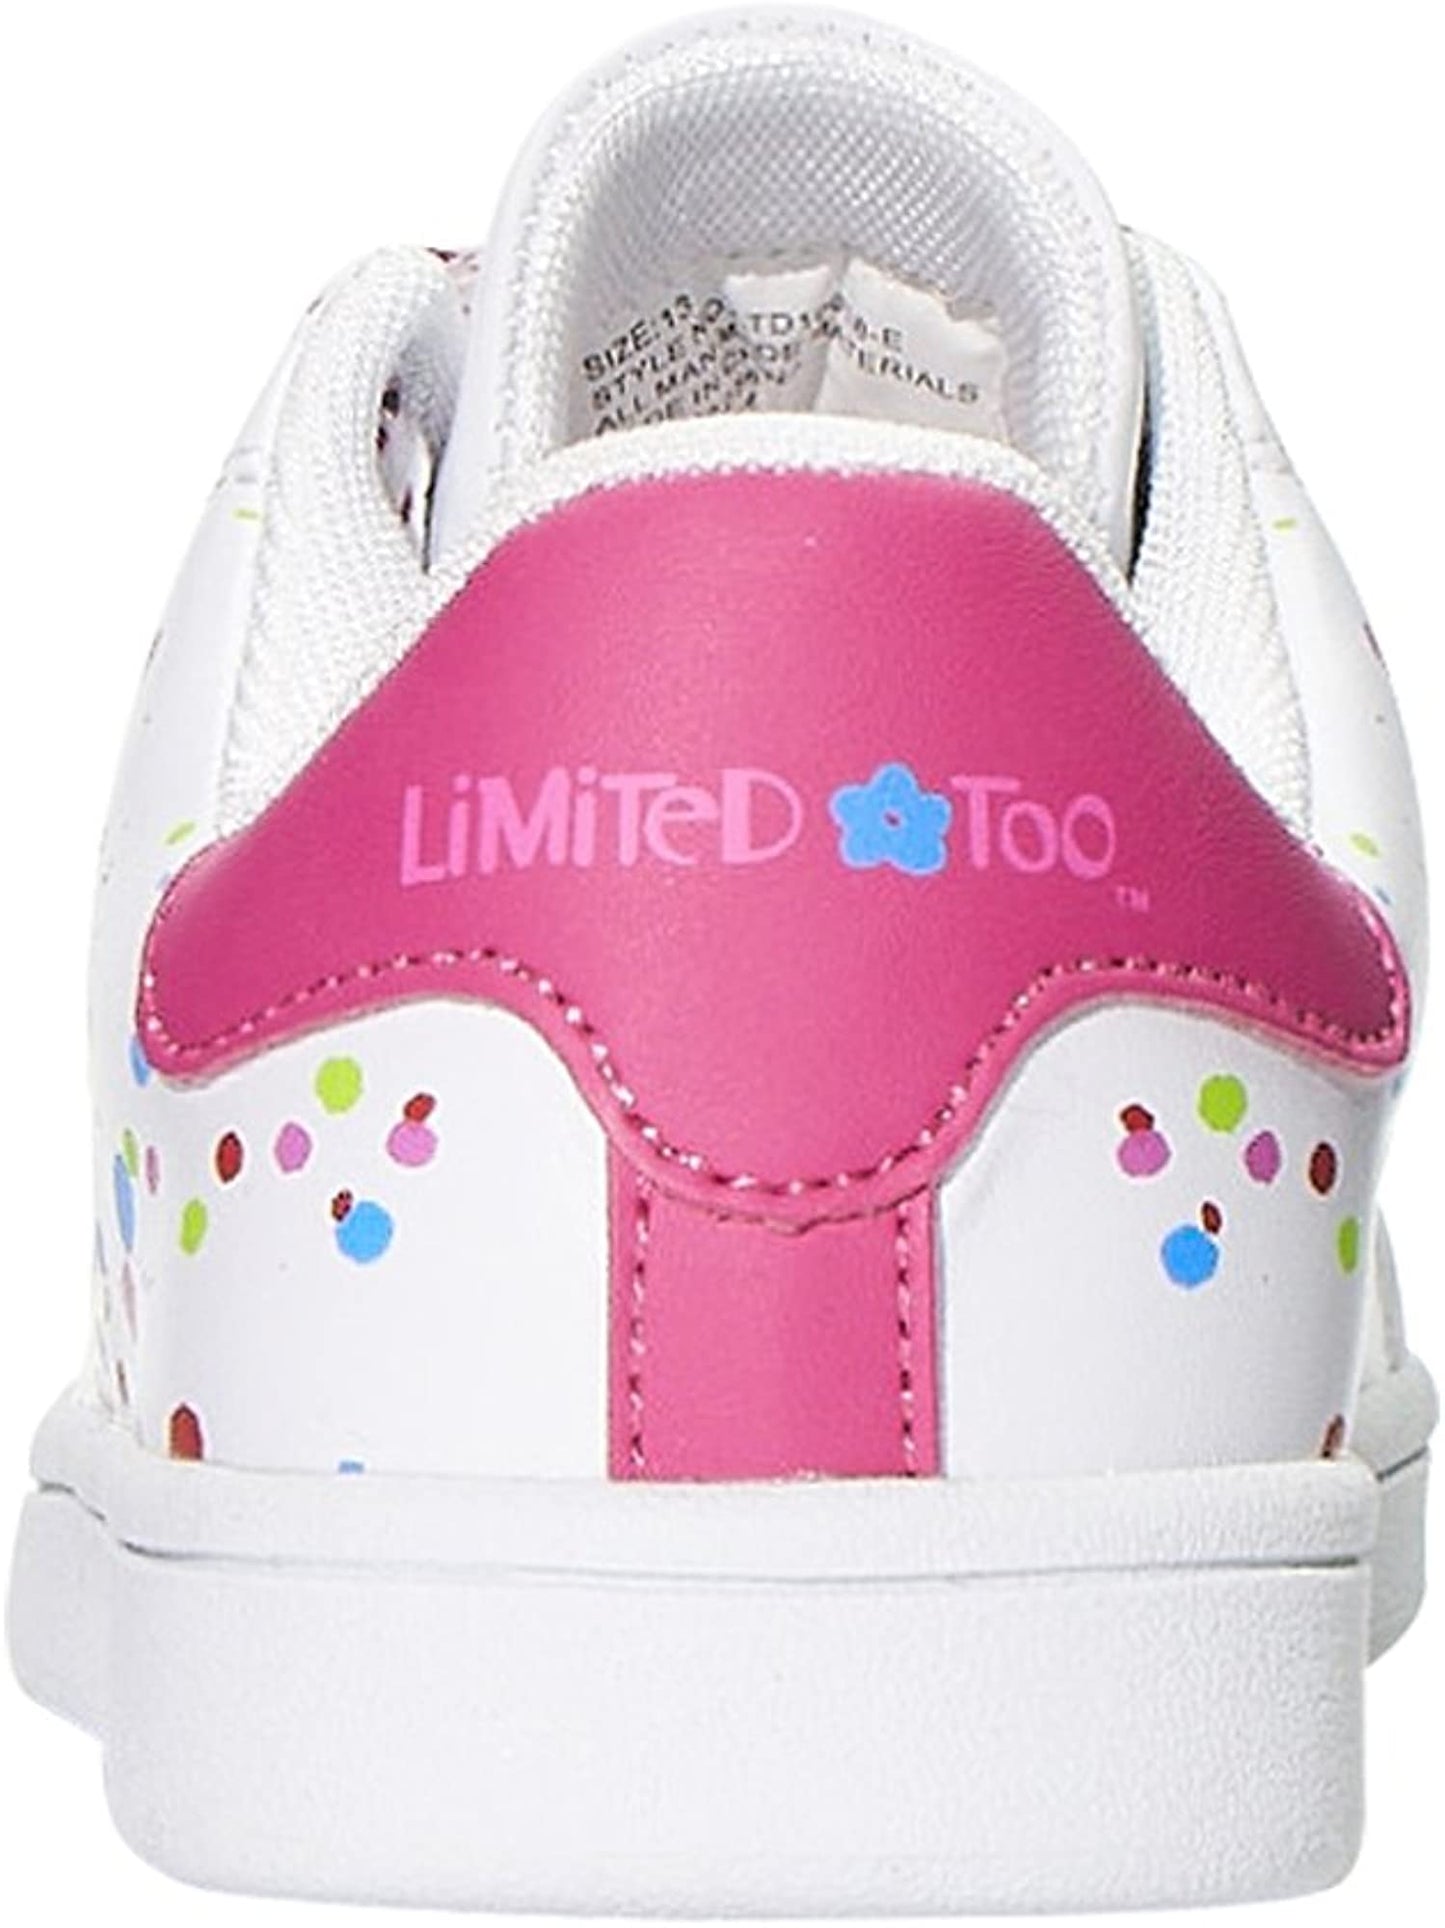 Too Lace Girls' Shoe Size 33